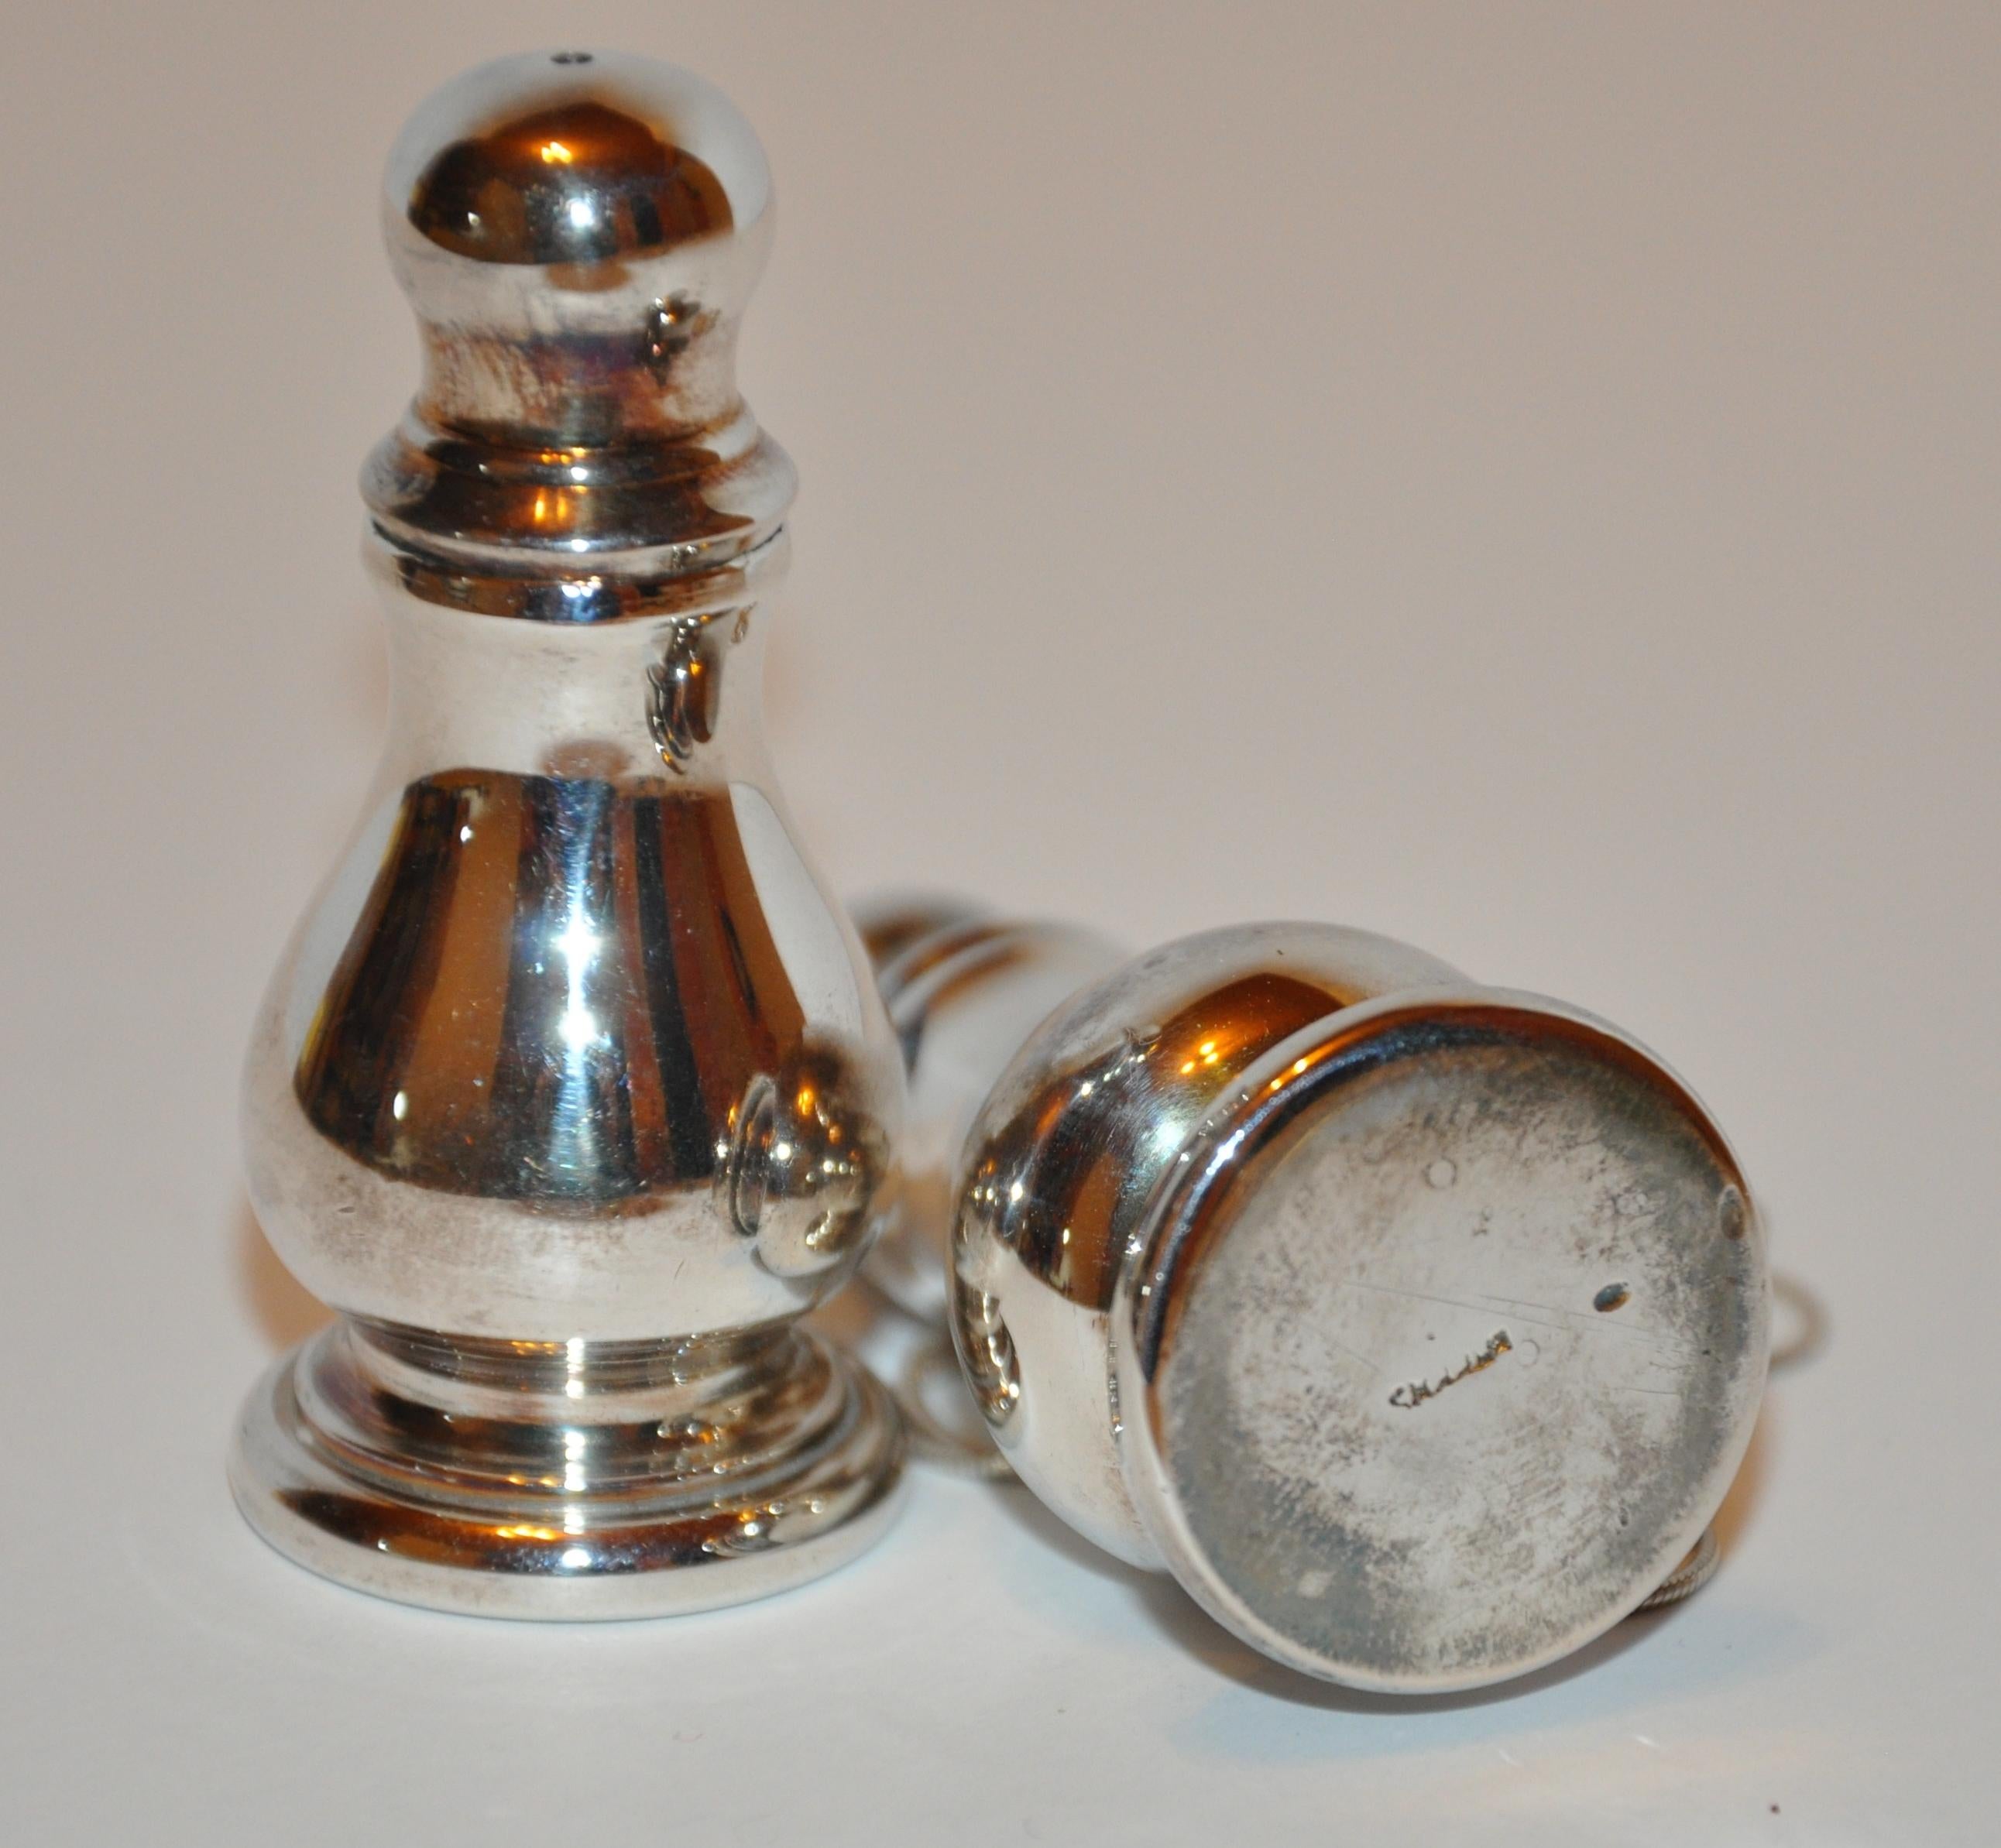        These pair of heavy sterling Silver salt & Pepper shakers features a screw-top. Makers' mark is etched in the center of the base. The height measures 2 1/8 inches, circumference along the base measures 1 inch. 